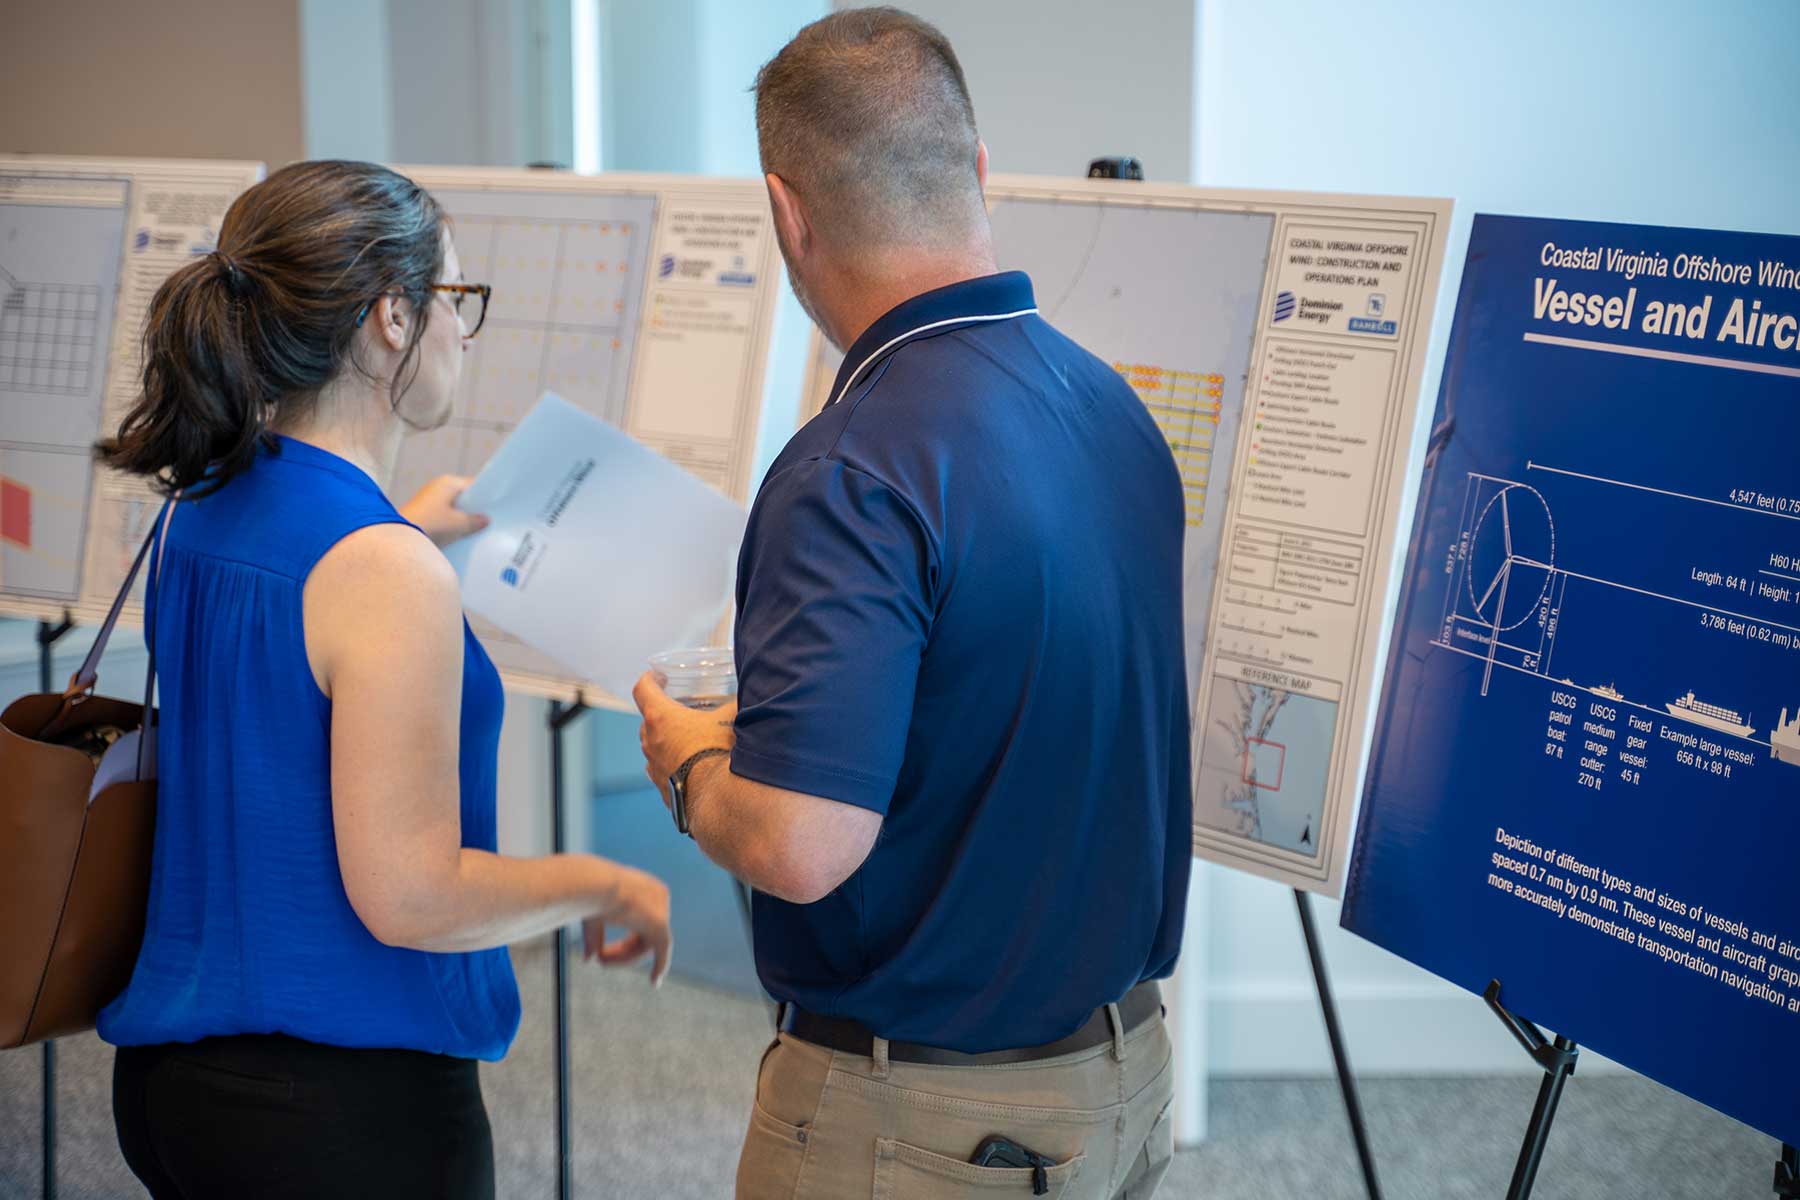 Dominion Energy employee explaining map to community member during open house